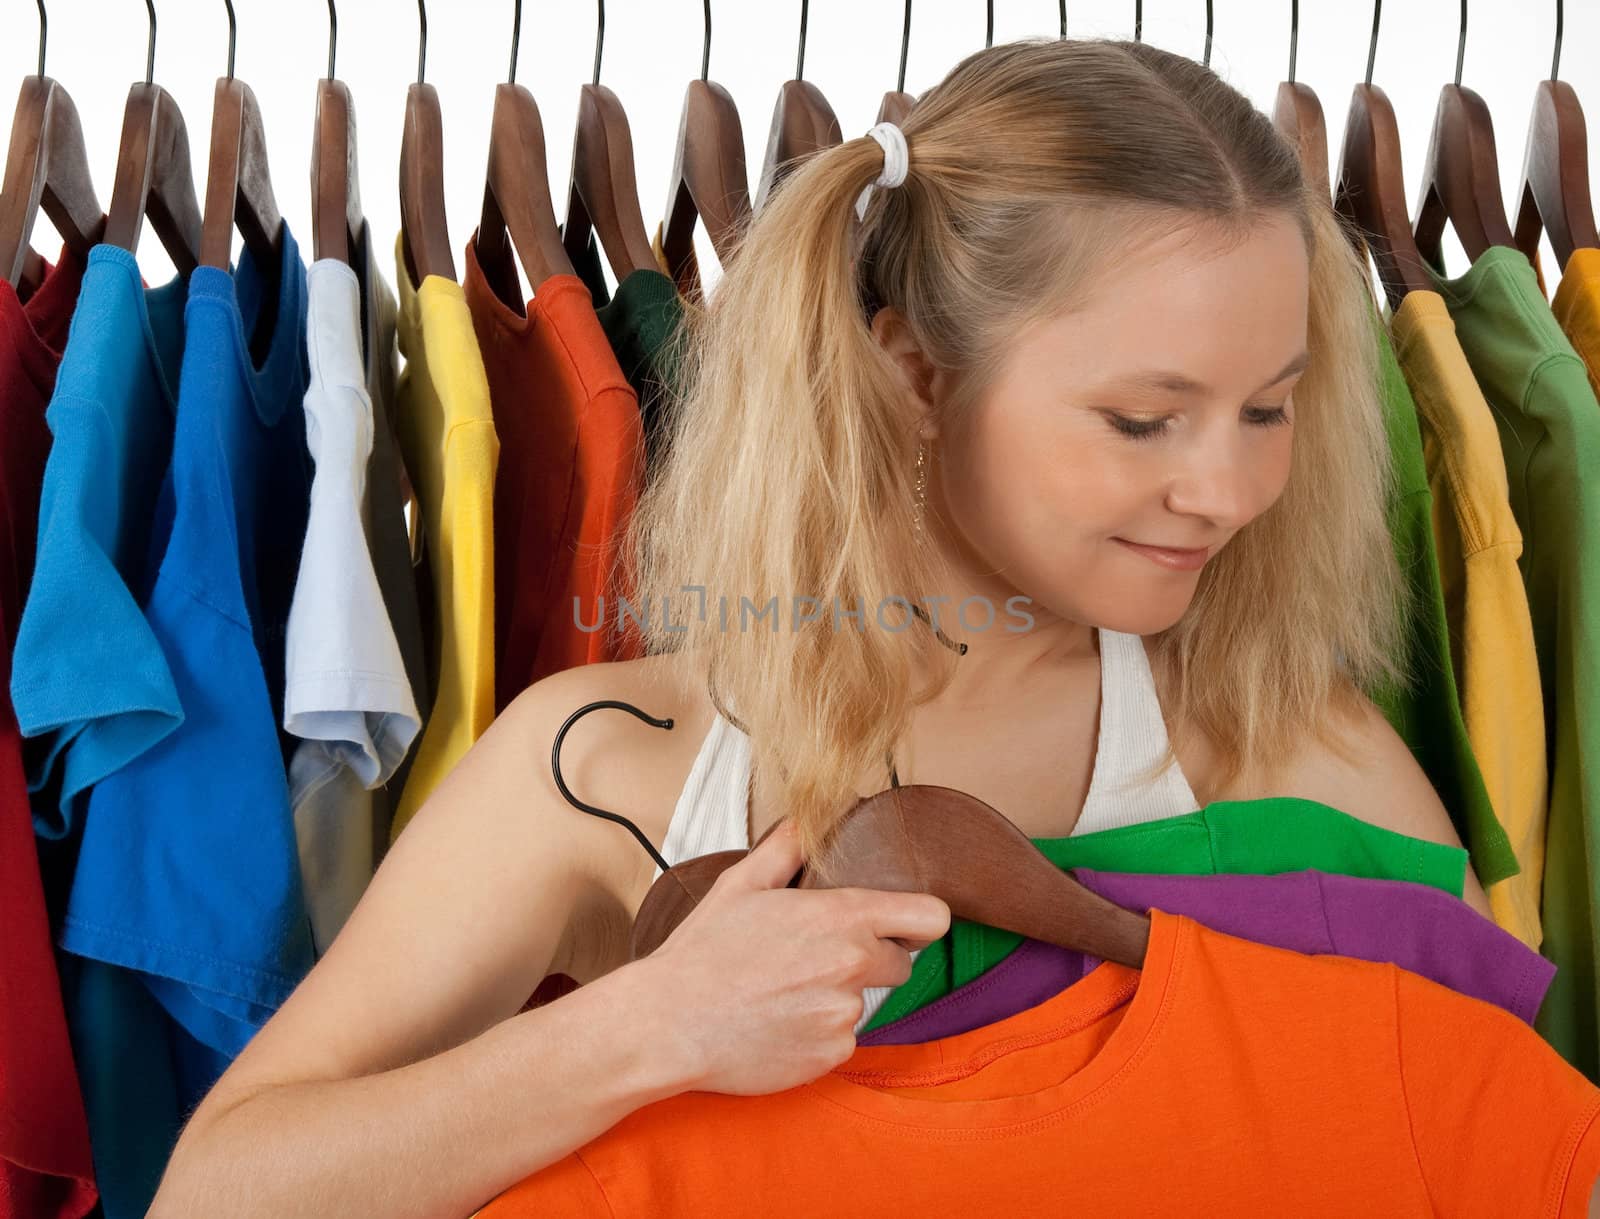 Girl standing near the rack of colourful clothing, choosing clothes to buy.